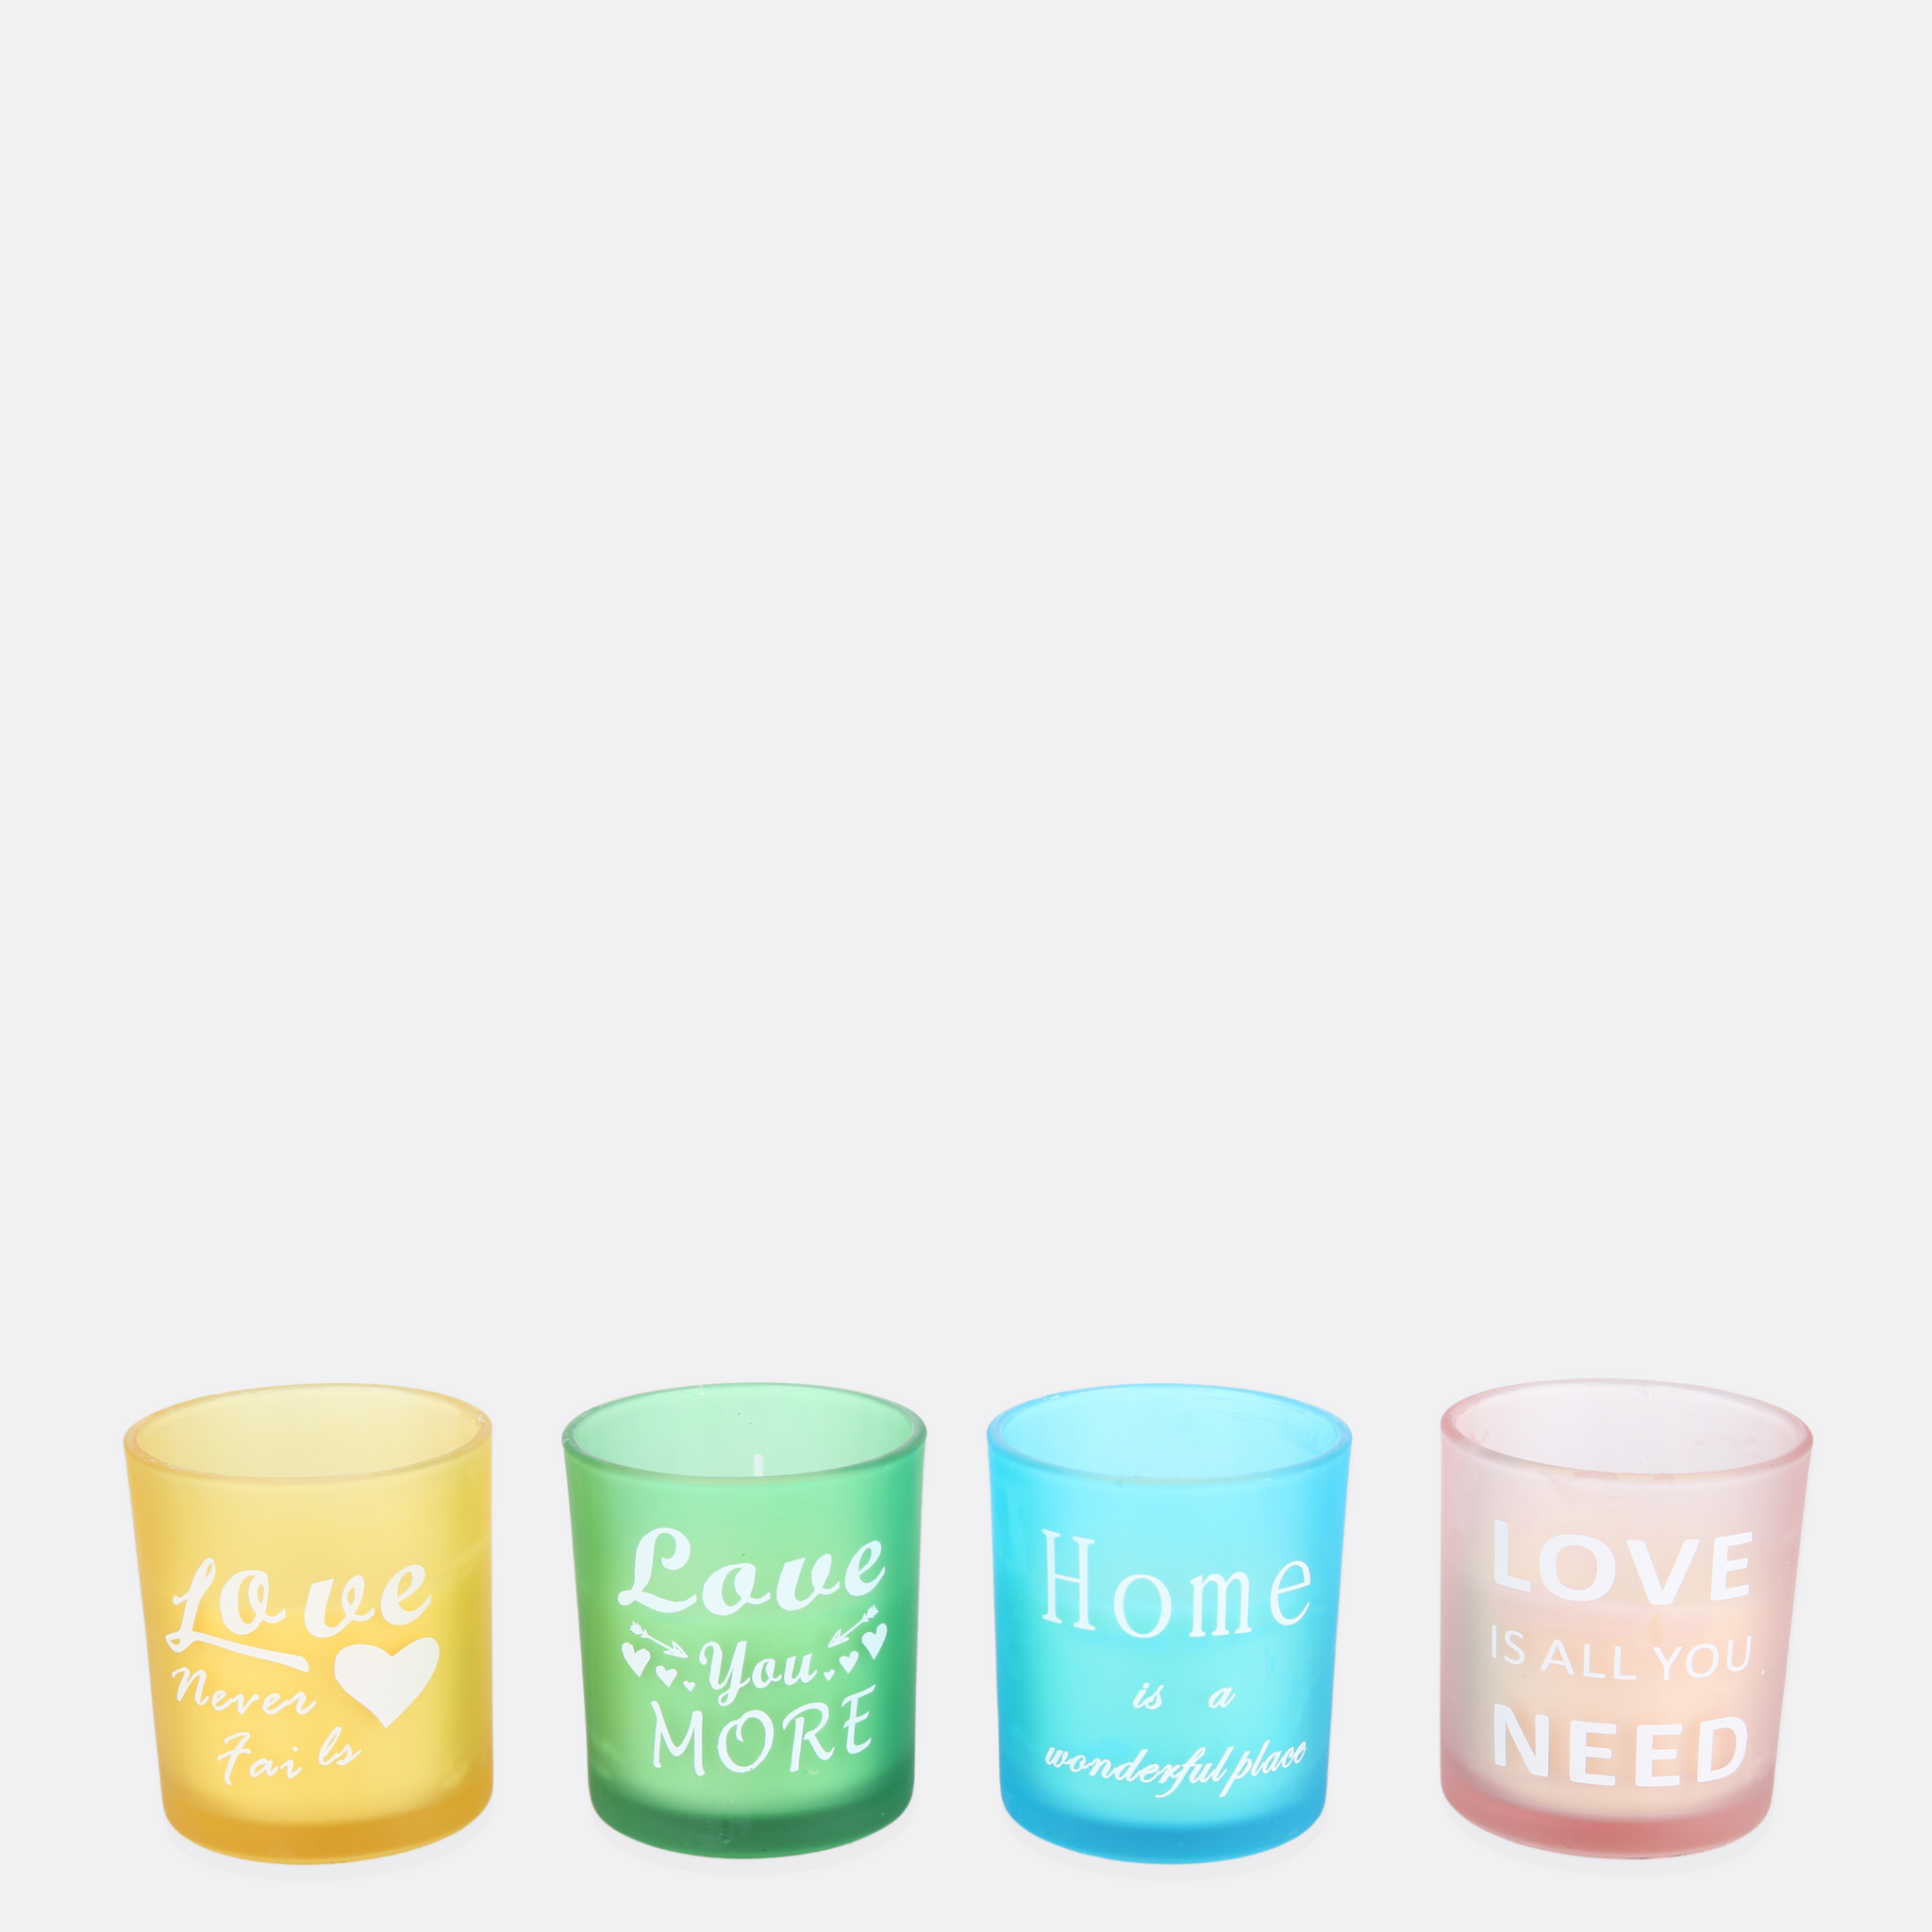 Quotations Fragrant Candles ( 4 Styles )